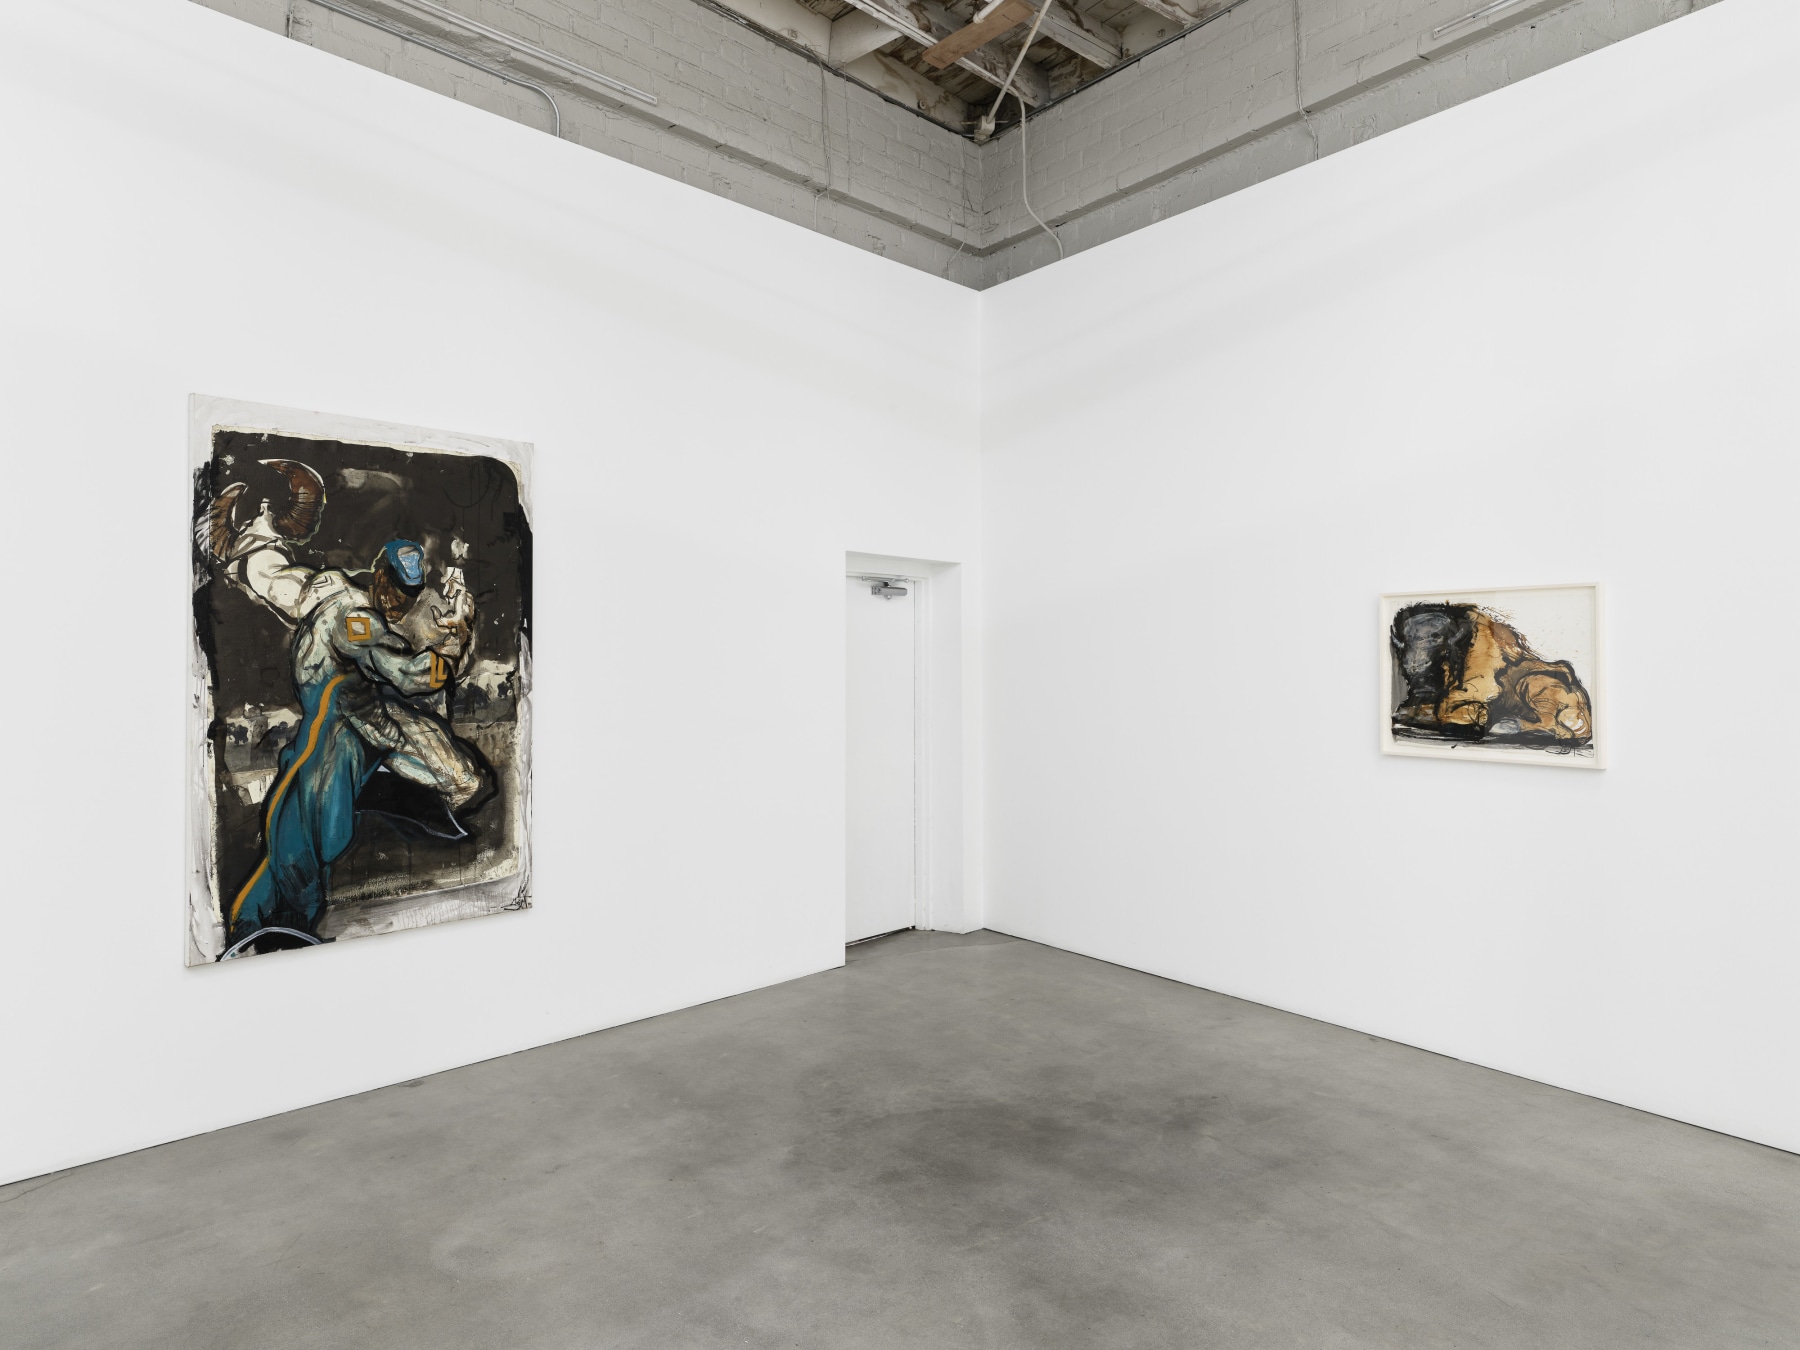 Chaz Guest, Gaining Pride with Promises Broken, installation view, 2022